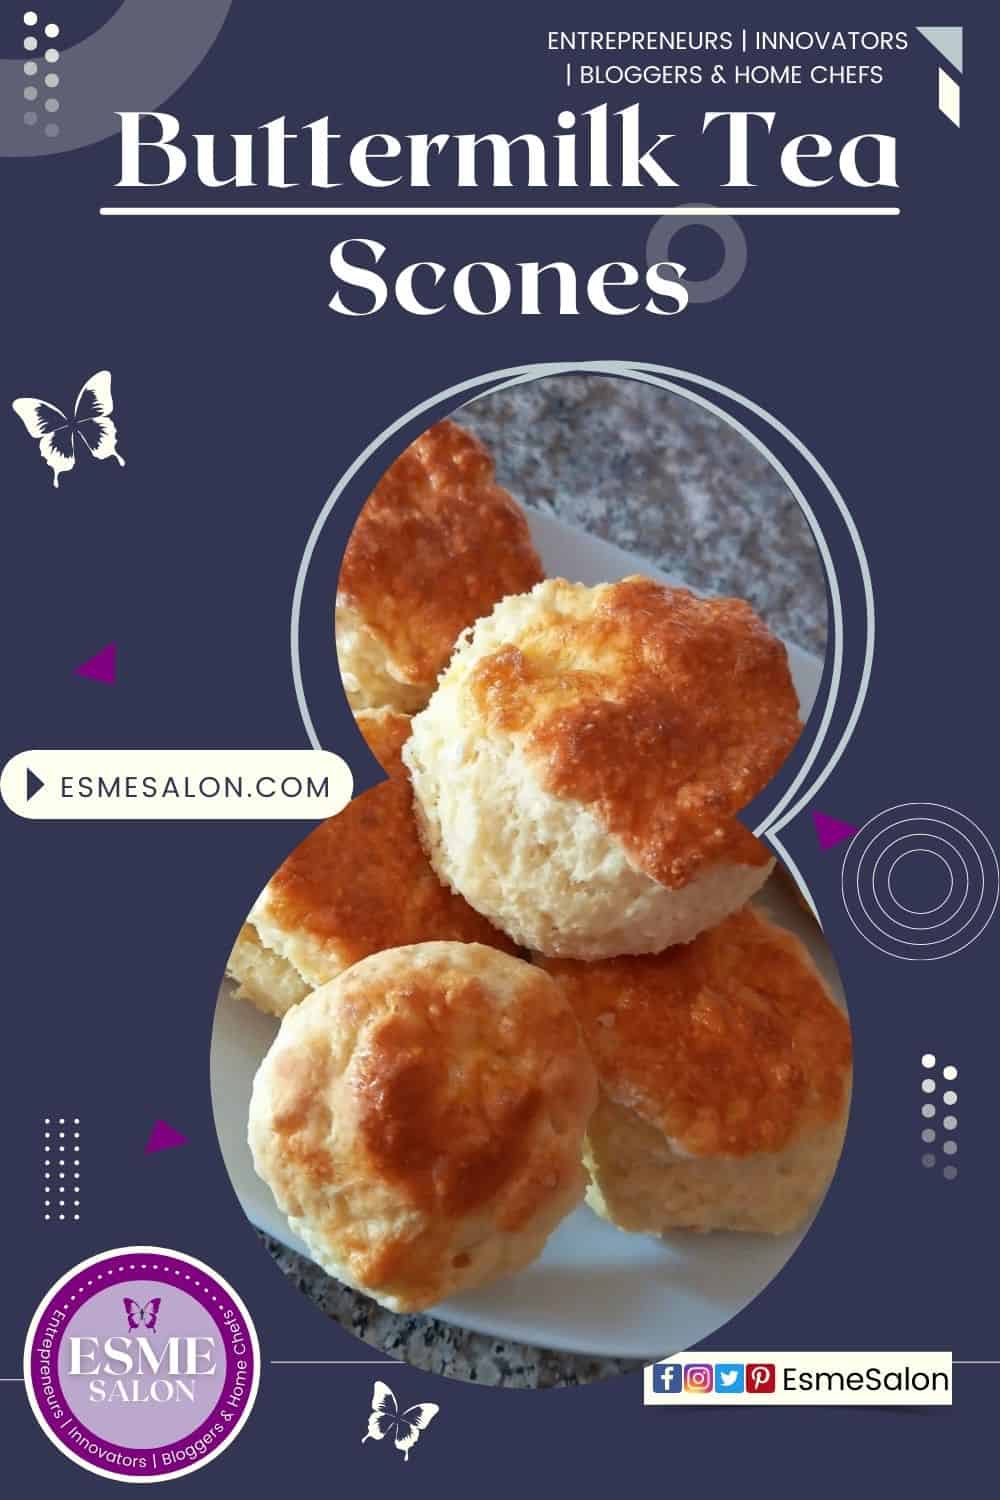 An image of a platter filled with freshly baked Buttermilk Tea Scones